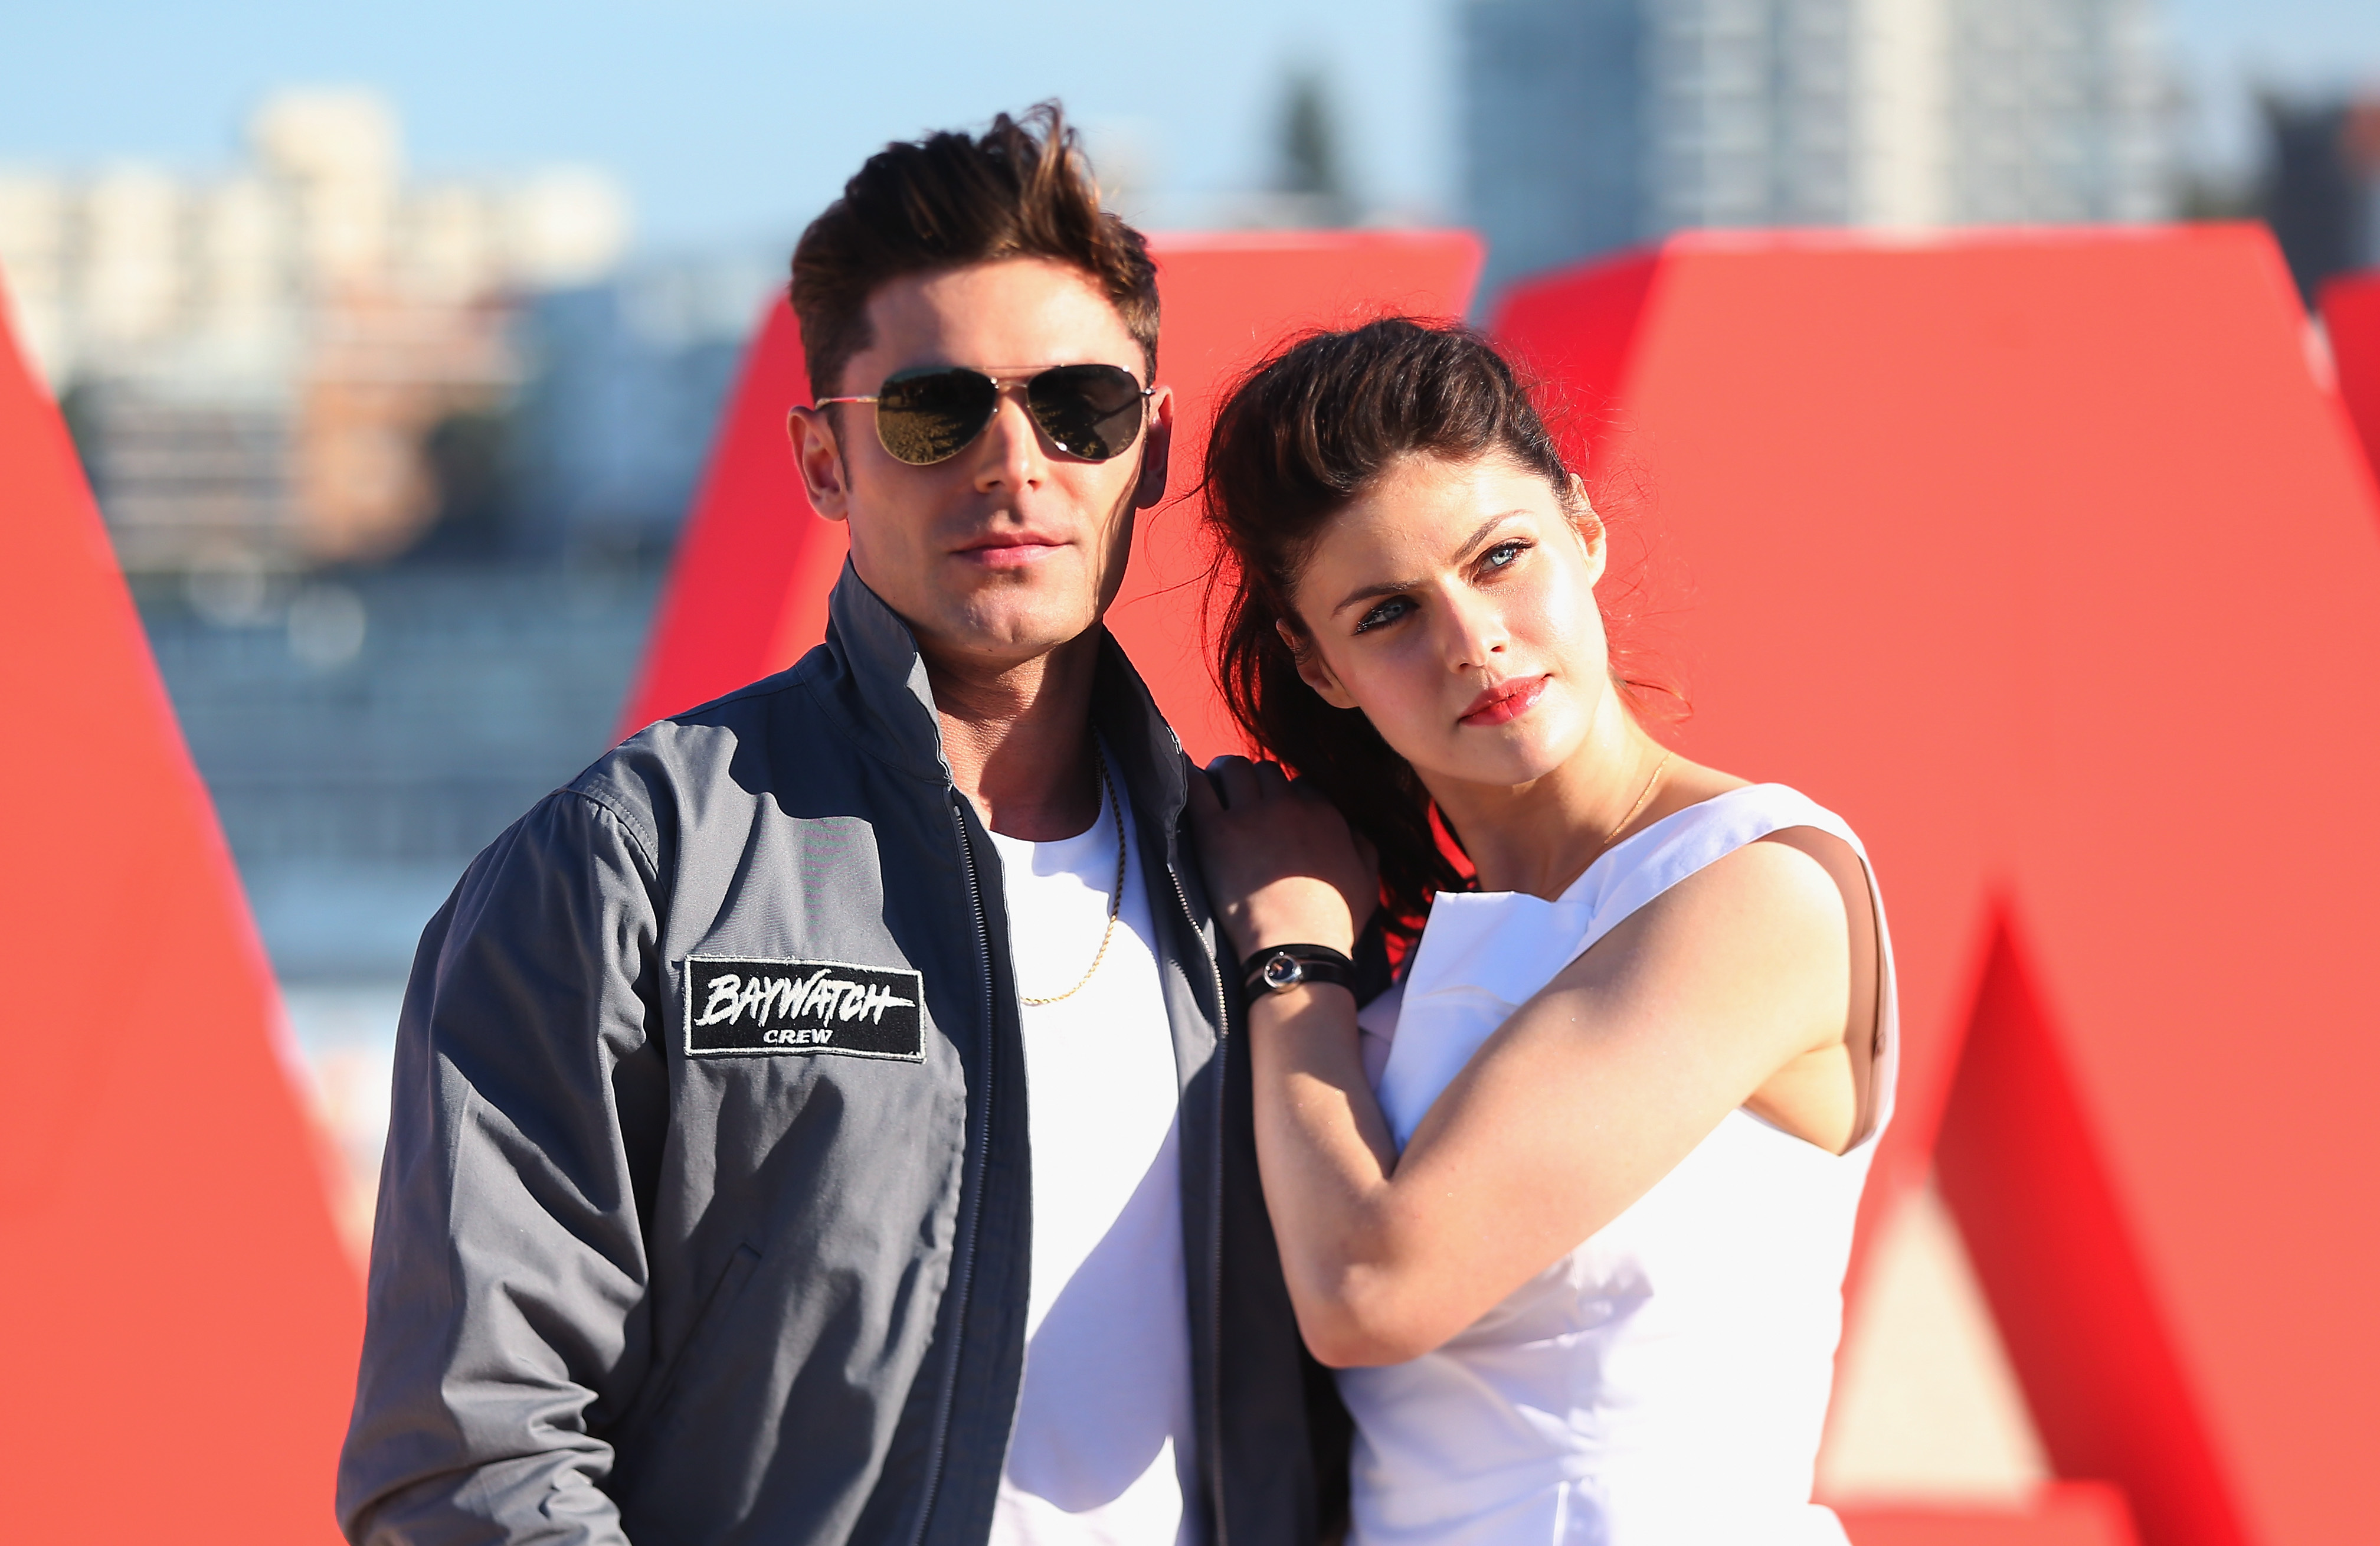 Zac Efron and Alexandra Daddario pose during a photo call for Baywatch on May 17, 2017 in Sydney, Australia. | Source: Getty Images